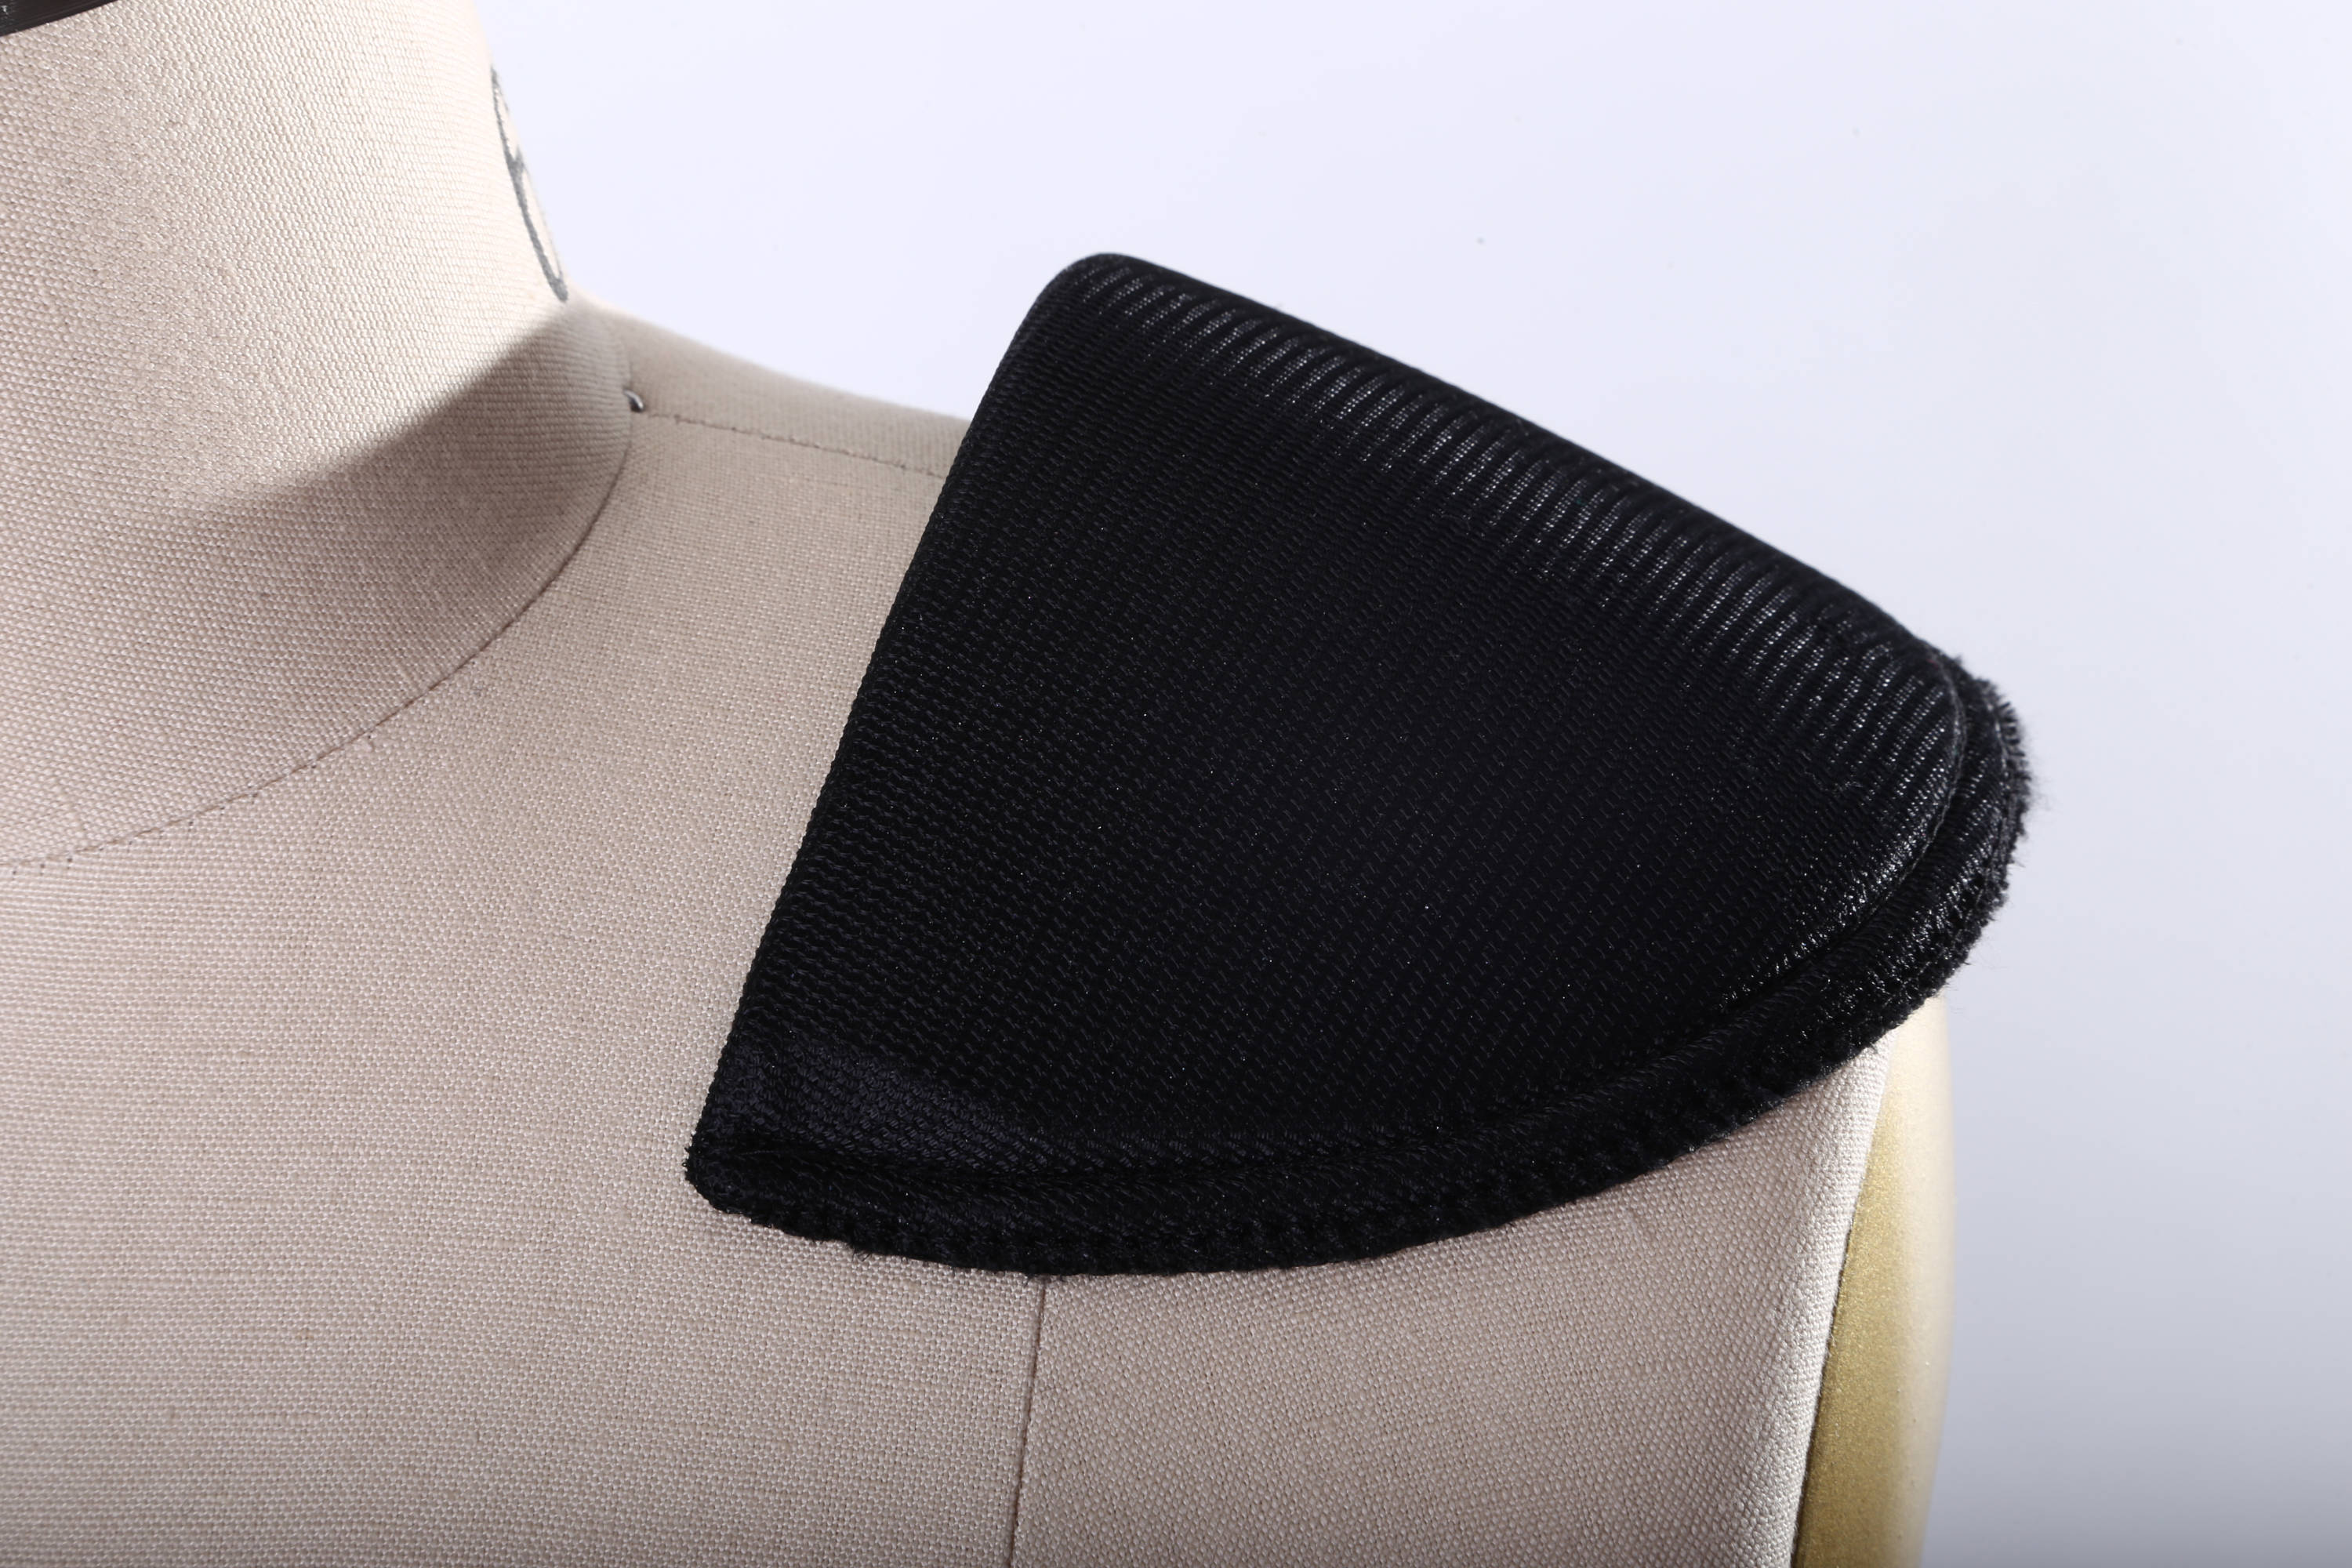 Shoulder Pads Pair of High Quality Fashion Shoulder Pads 1.5 or 3/4 1/2  Nude Black or White White Foam Shoulder Pads Black Shoulder Pads -   Canada